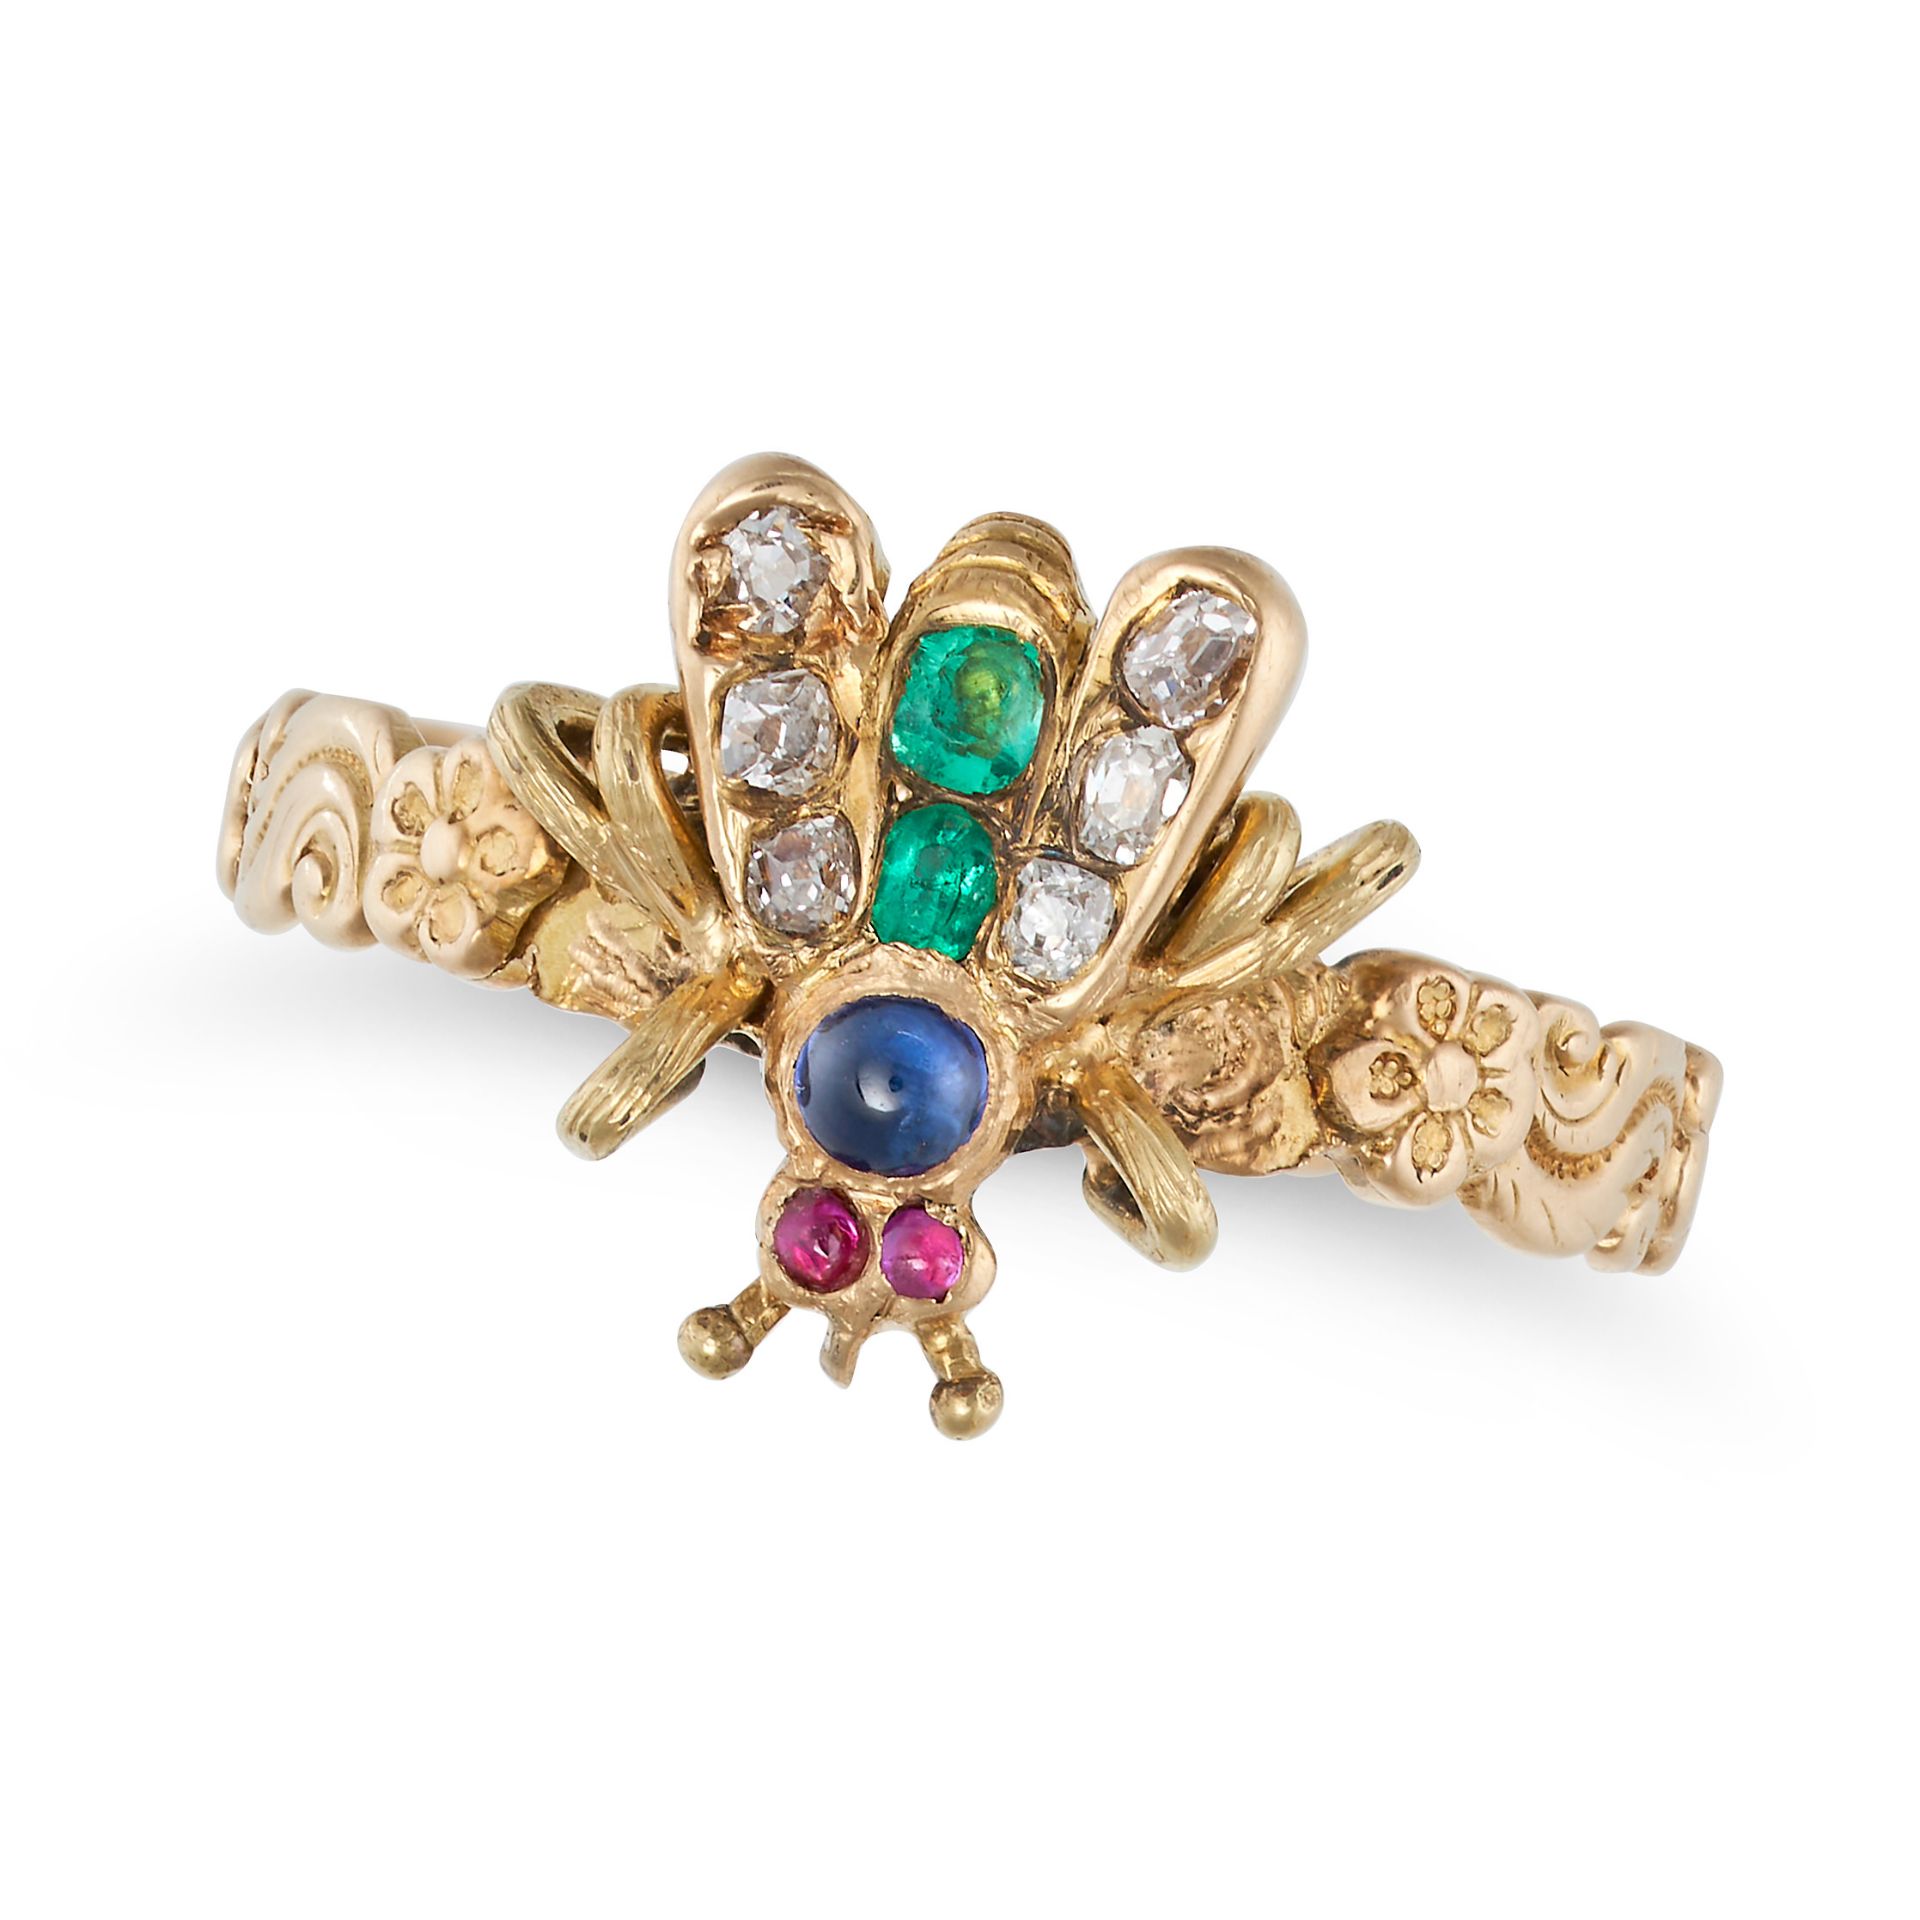 A RUBY, SAPPHIRE, EMERALD AND DIAMOND FLY RING designed as a fly set with round cabochon rubies a...